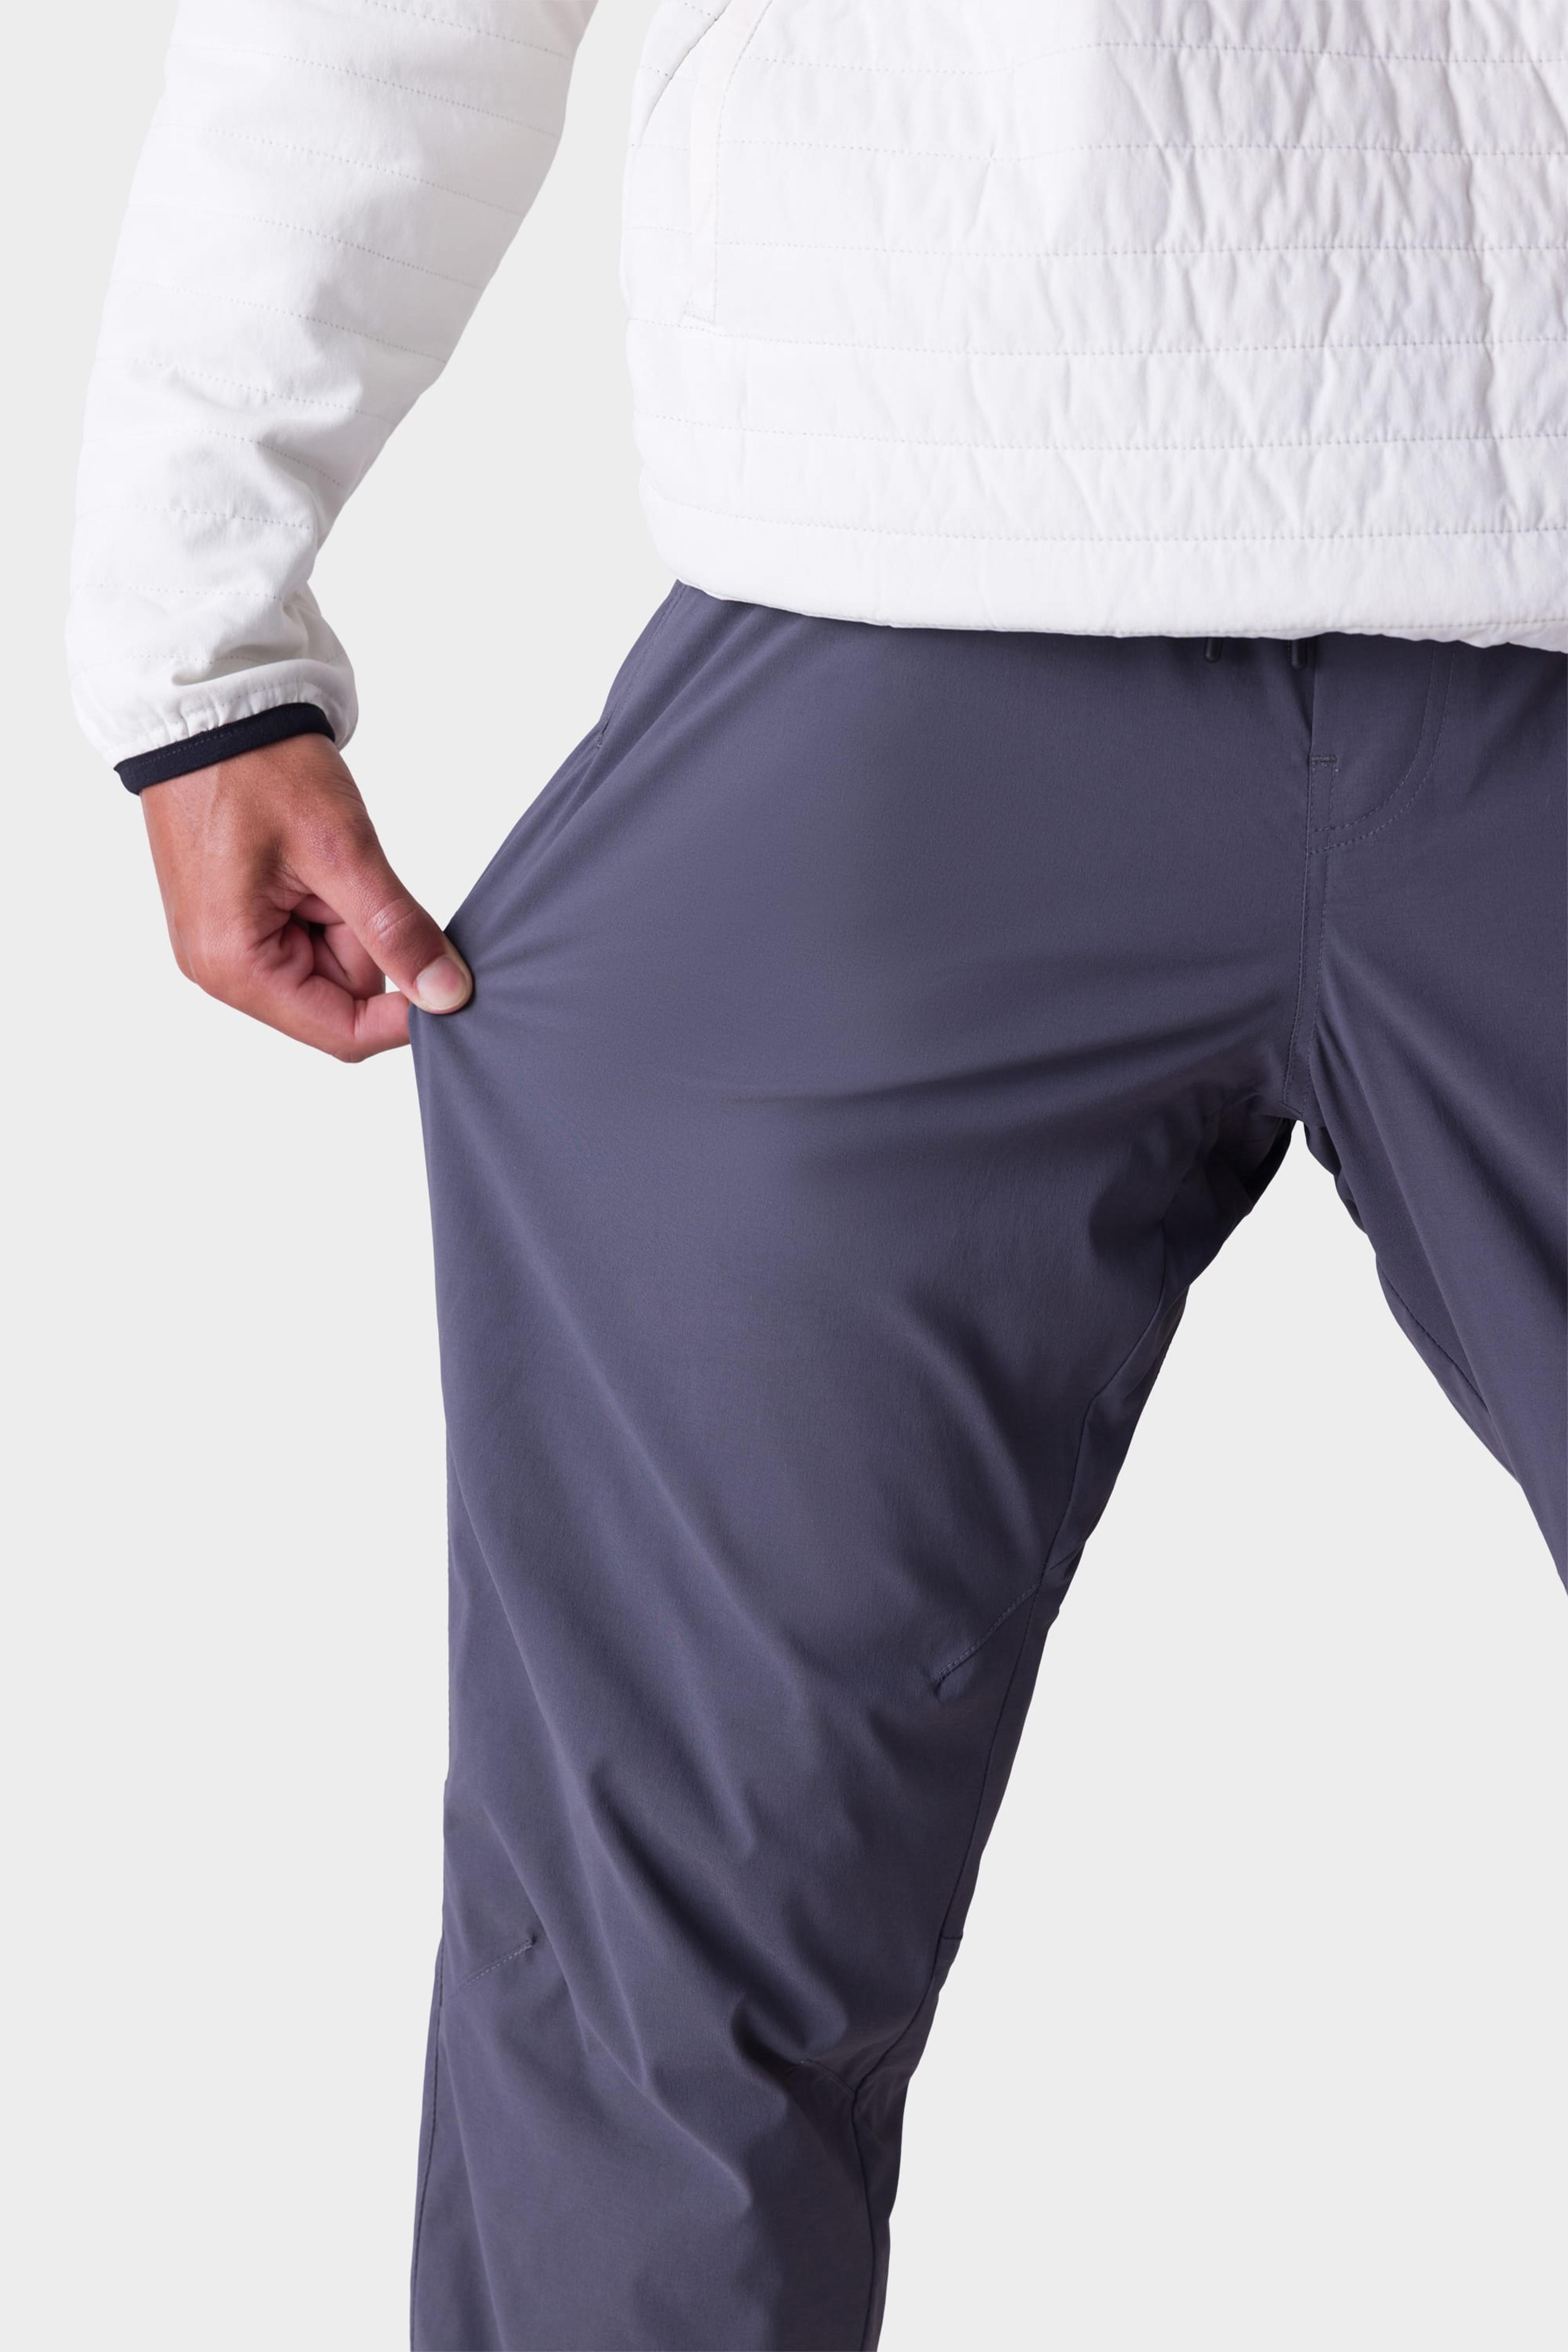 Alternate View 29 of 686 Men's Thermadry Merino-Lined Insulated Pant